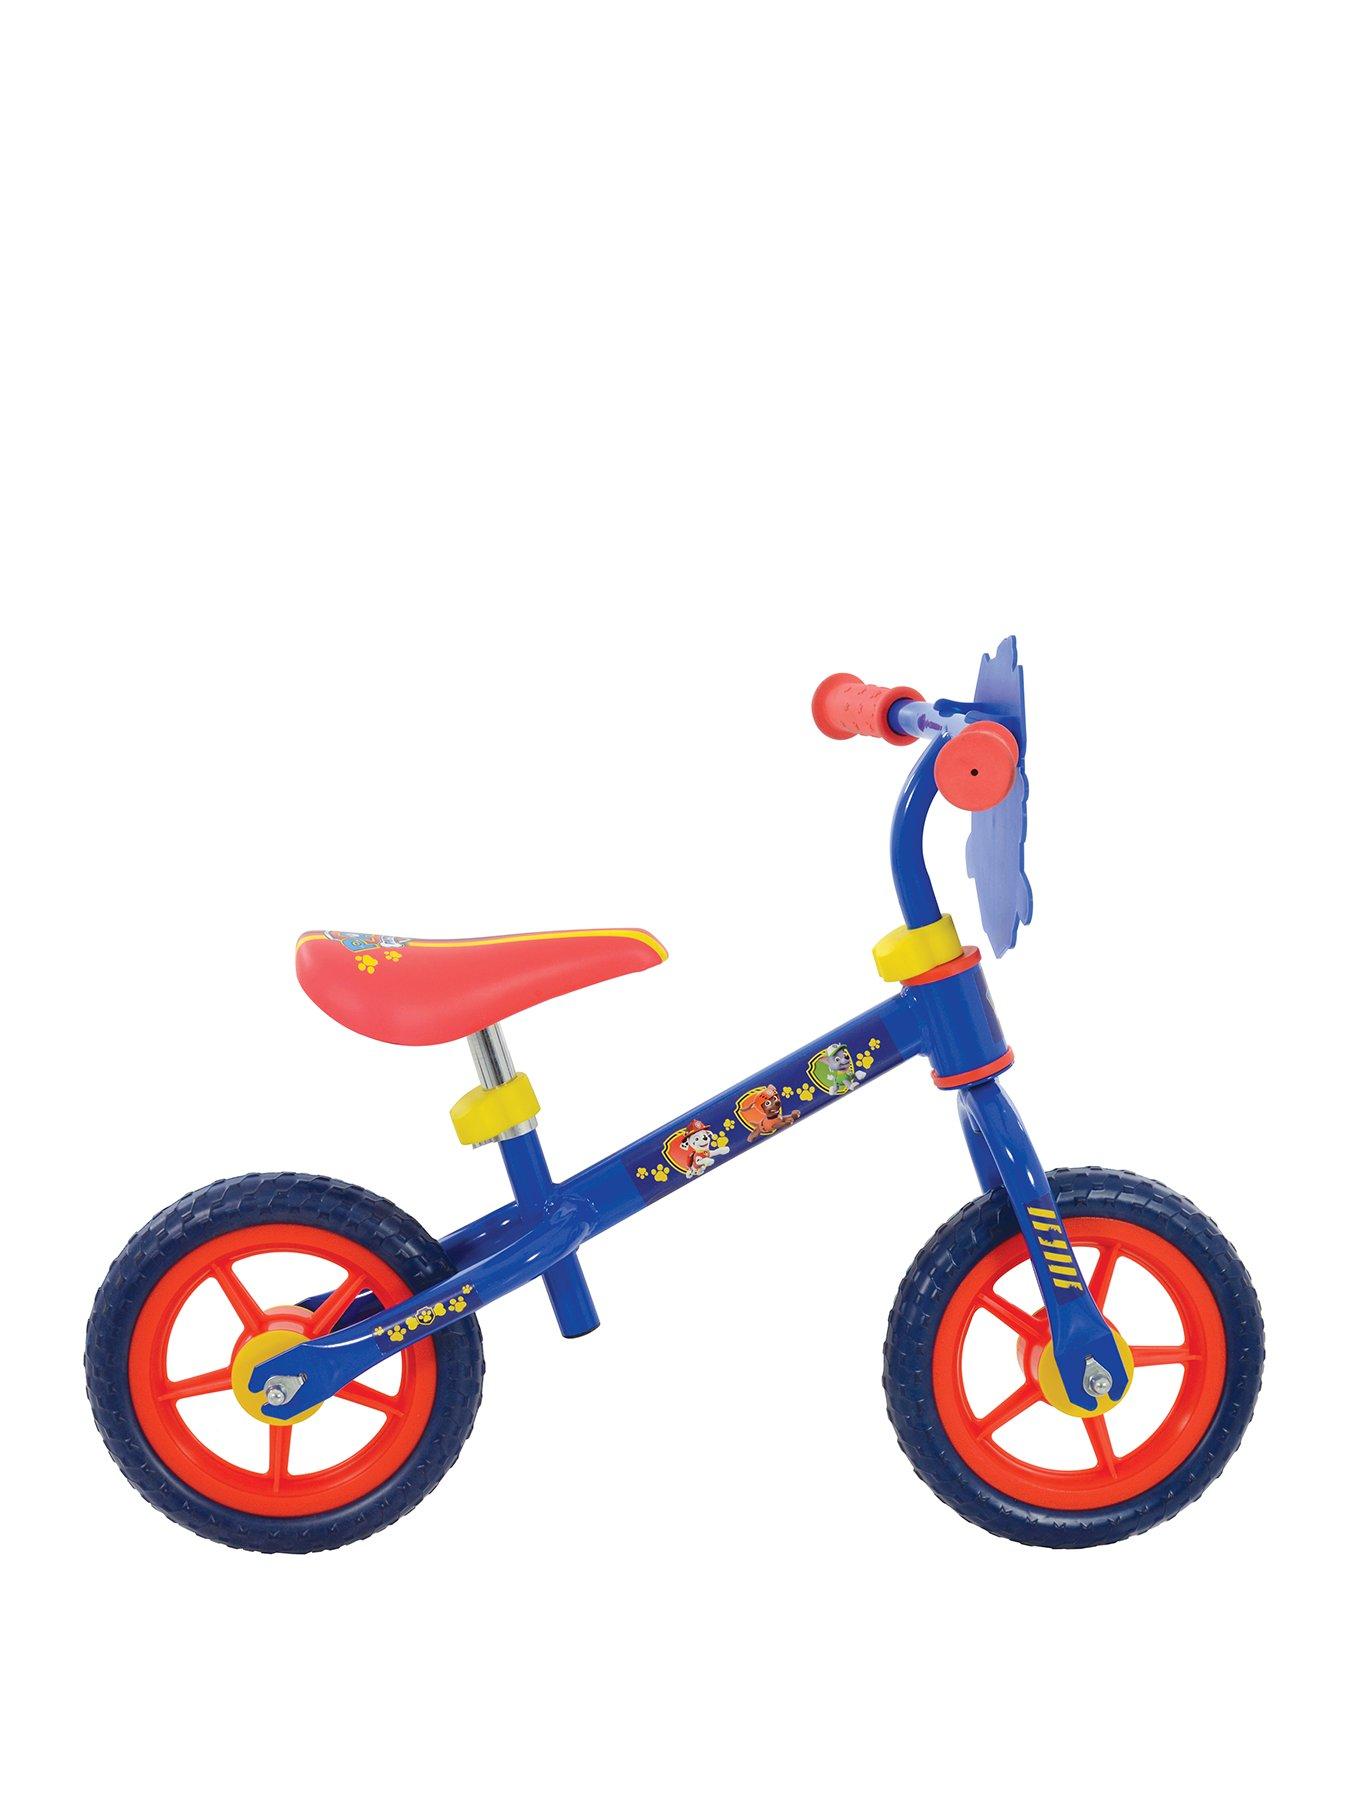 bike for 3 year old uk